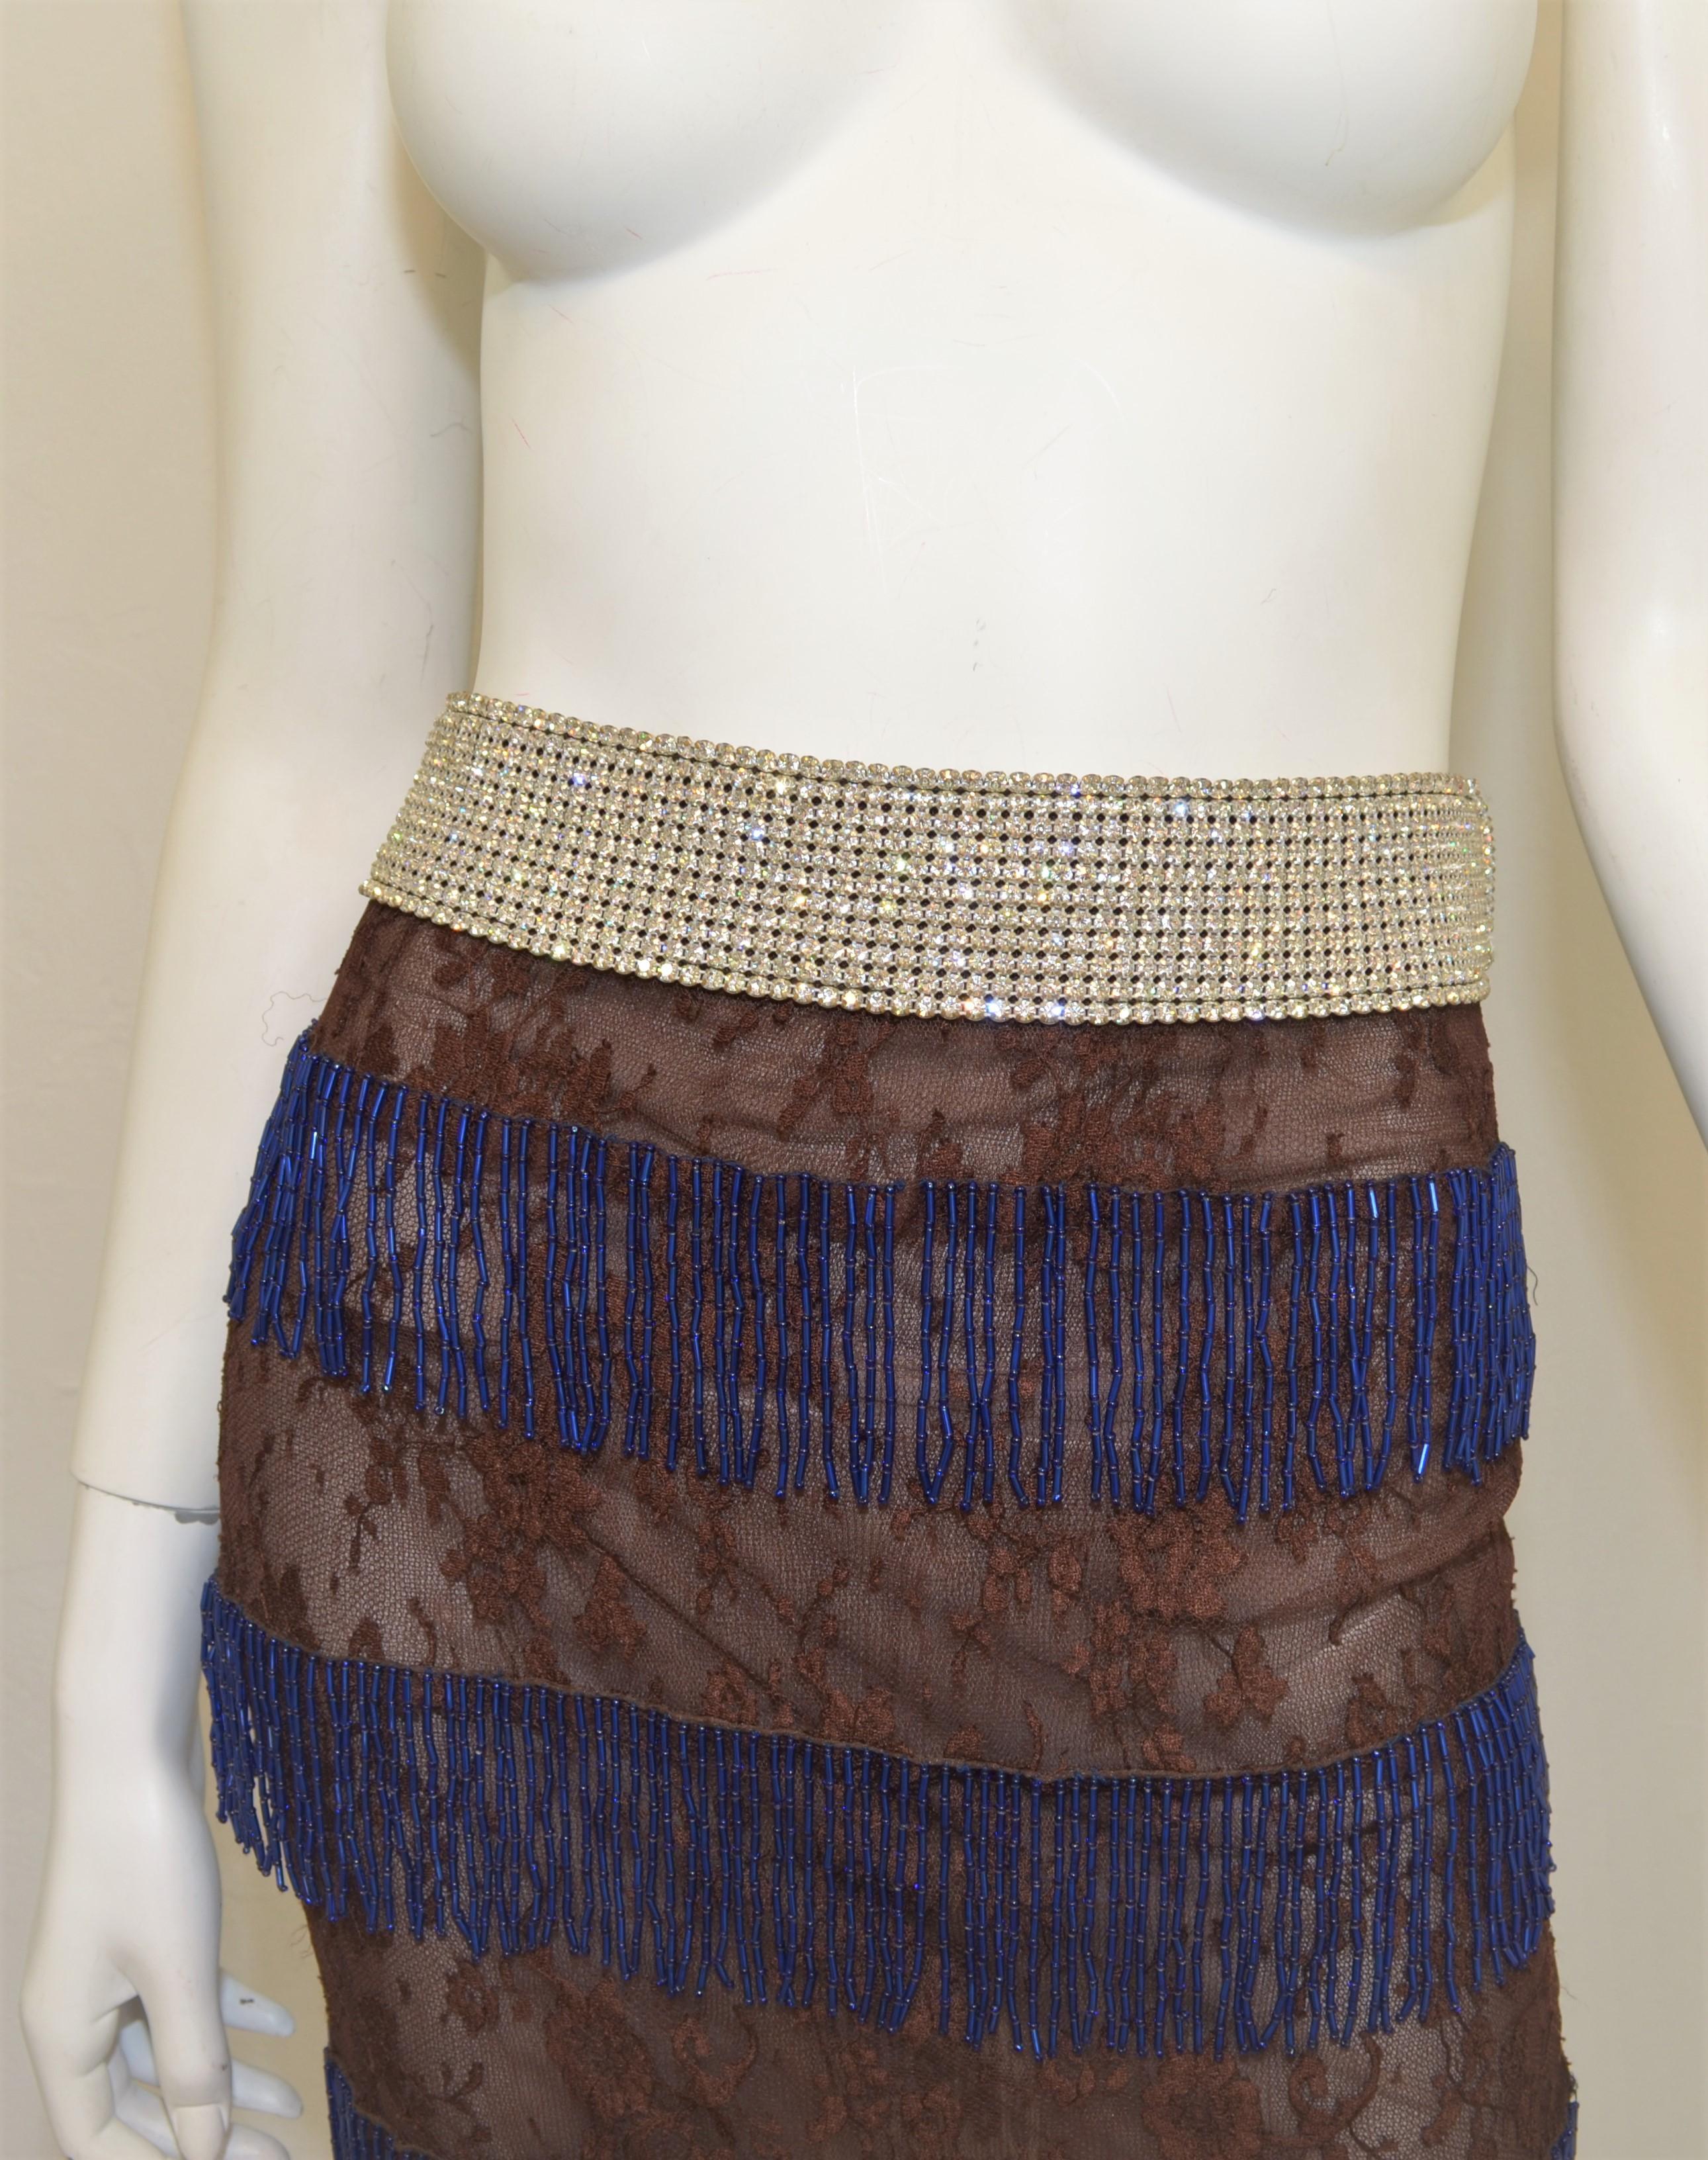 Dolce & Gabbana Brown lace skirt with a rhinestone encrusted waistband and blue fringed bead-work. Skirt has a back zipper closure. Labeled Size 42, viscose and nylon blend, full lining. Made in Italy.

Measurements:
Waist 31”, hips 34”, length 33”